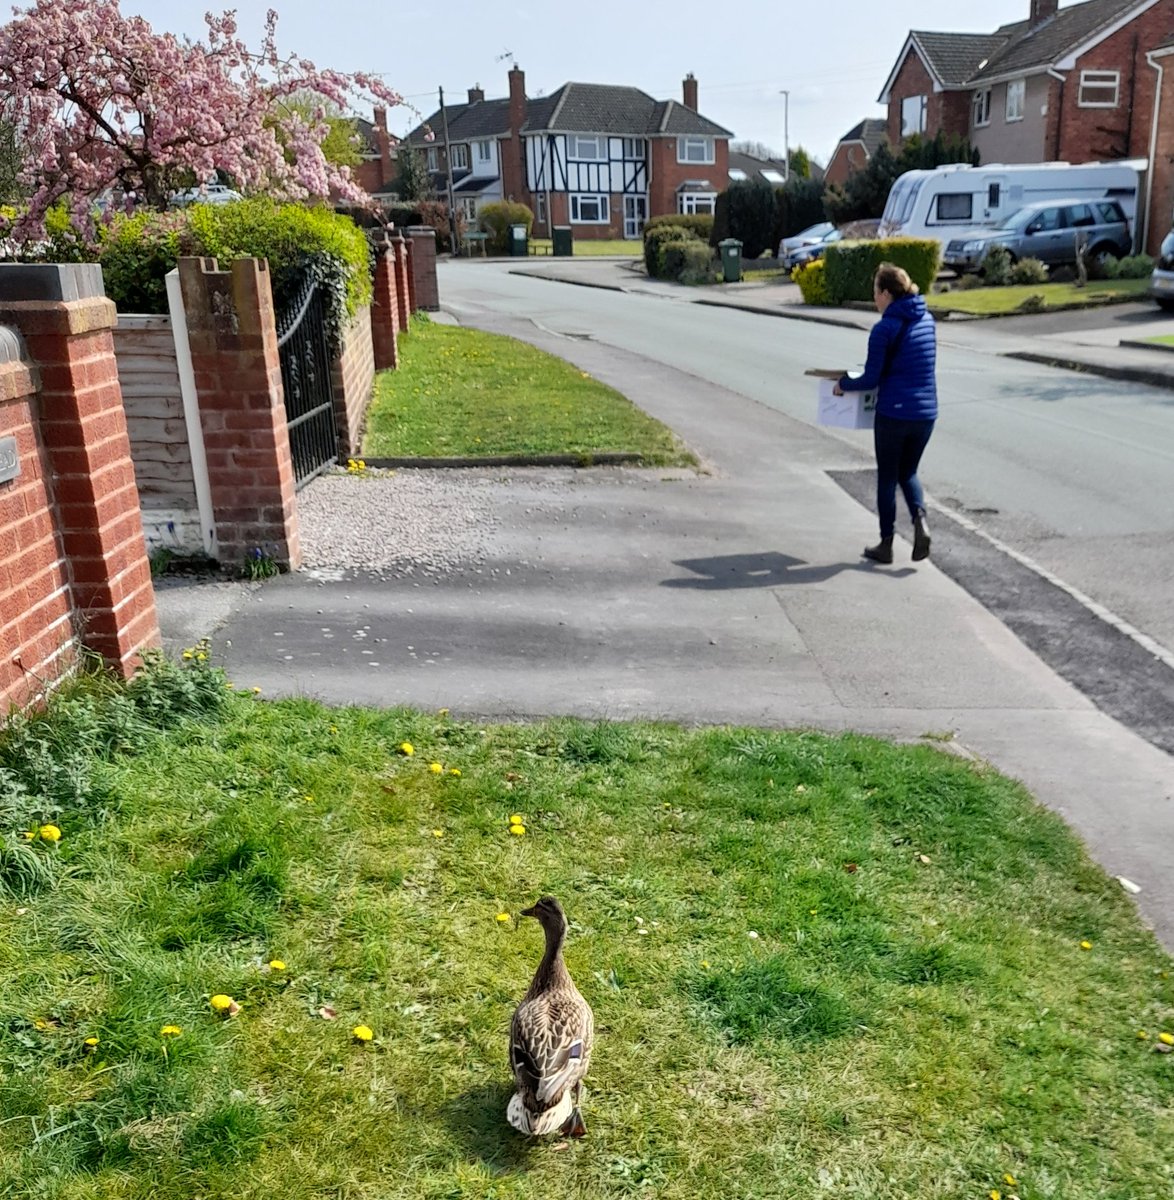 So we're walking all the ducklings to the nearest canal, trying to stop mother duck wandering off or into the road. It's pretty nervewracking but I think we're on the home stetch